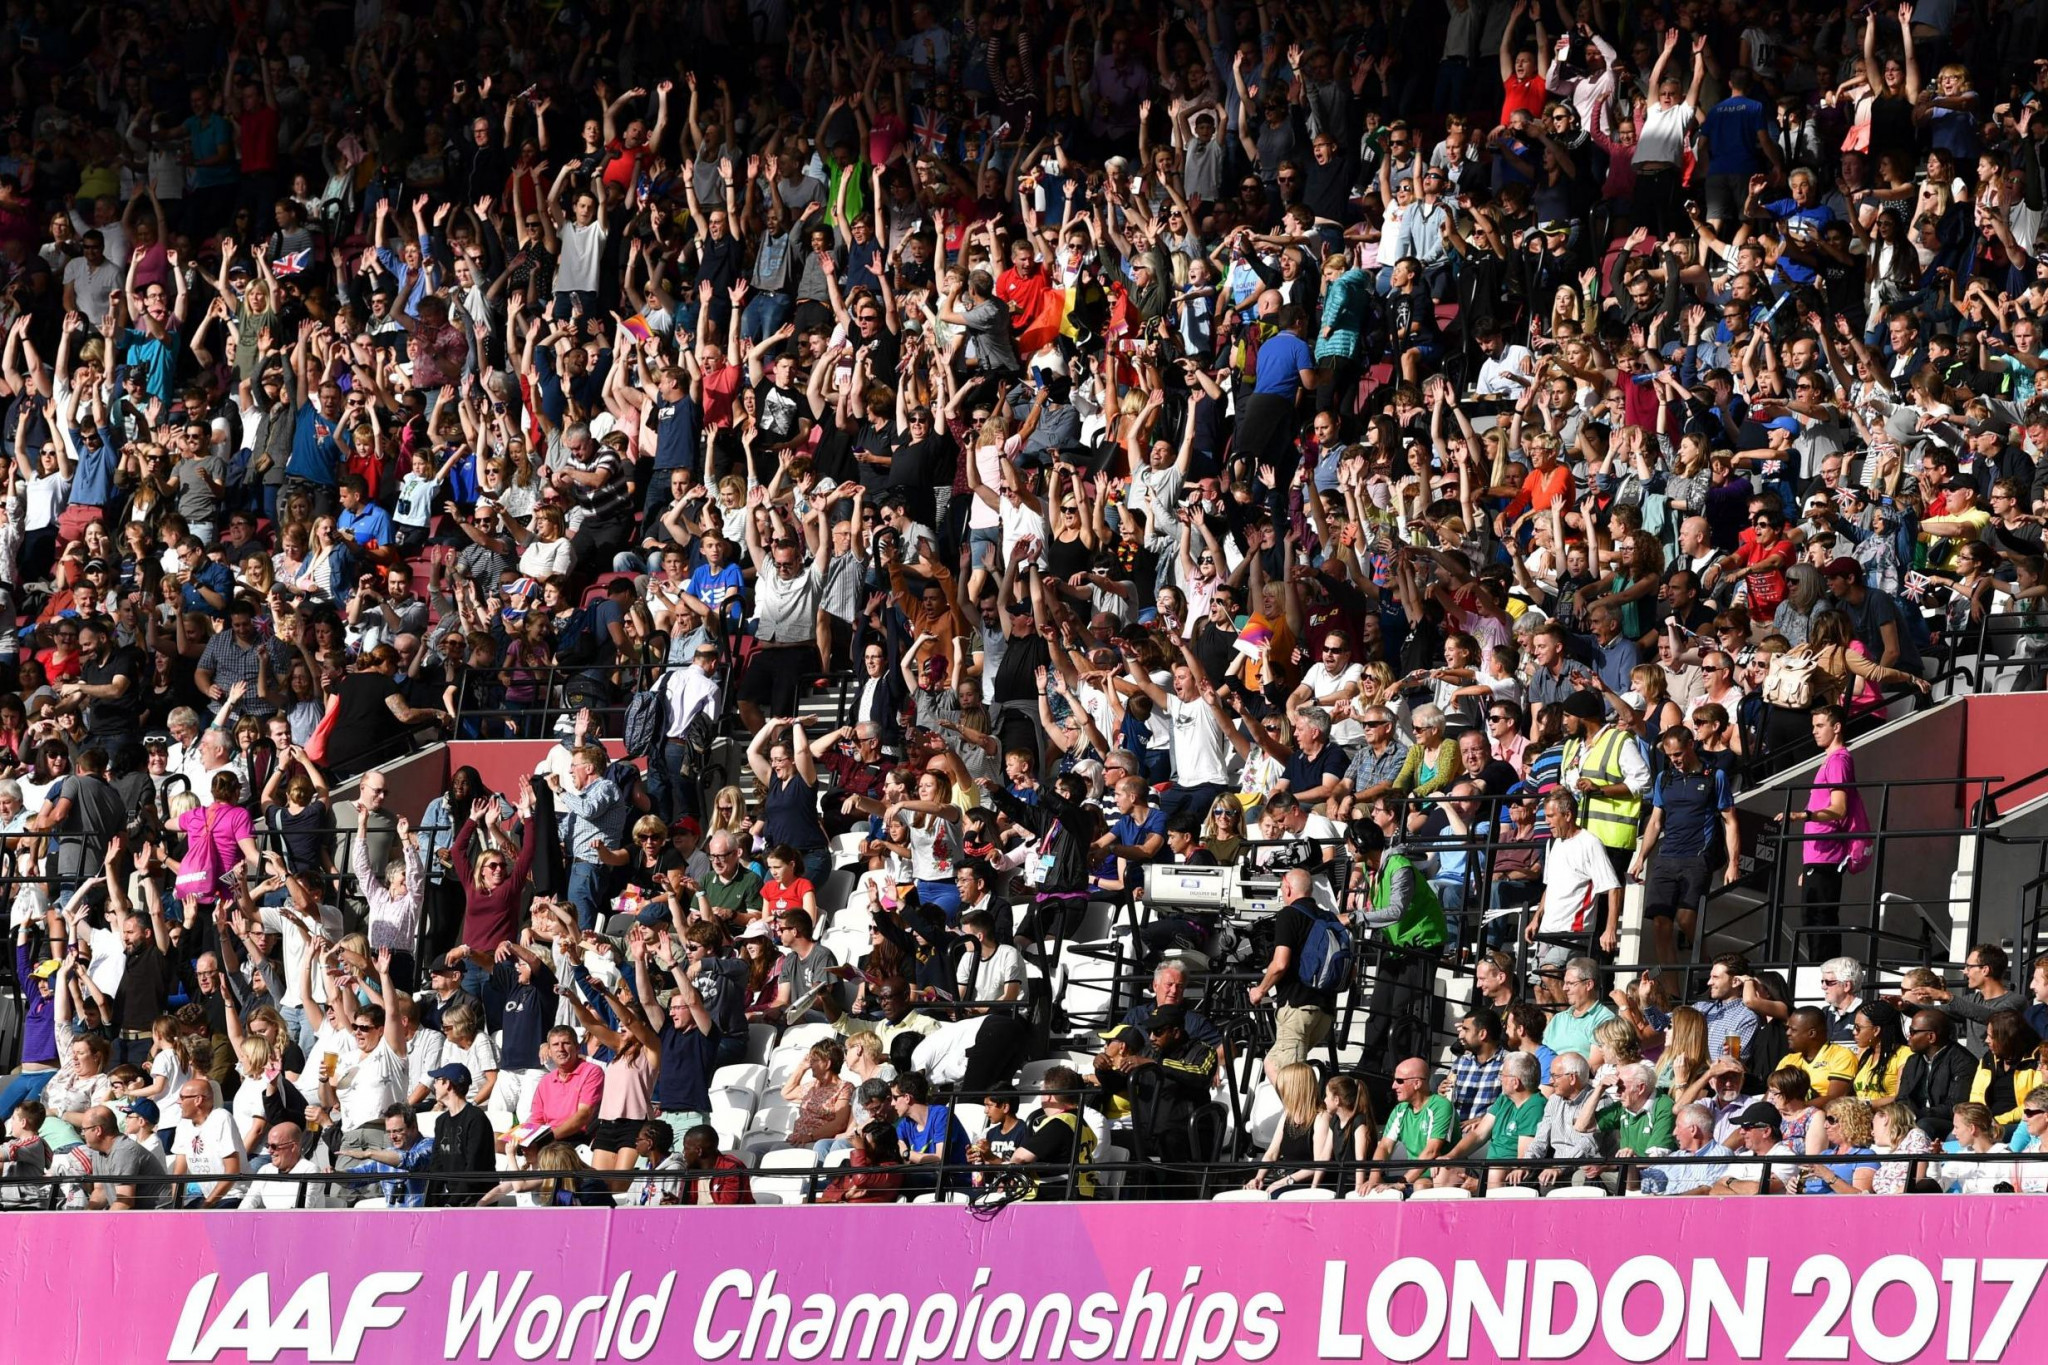 Record crowds attended the 2017 IAAF World Championships in London ©Getty Images